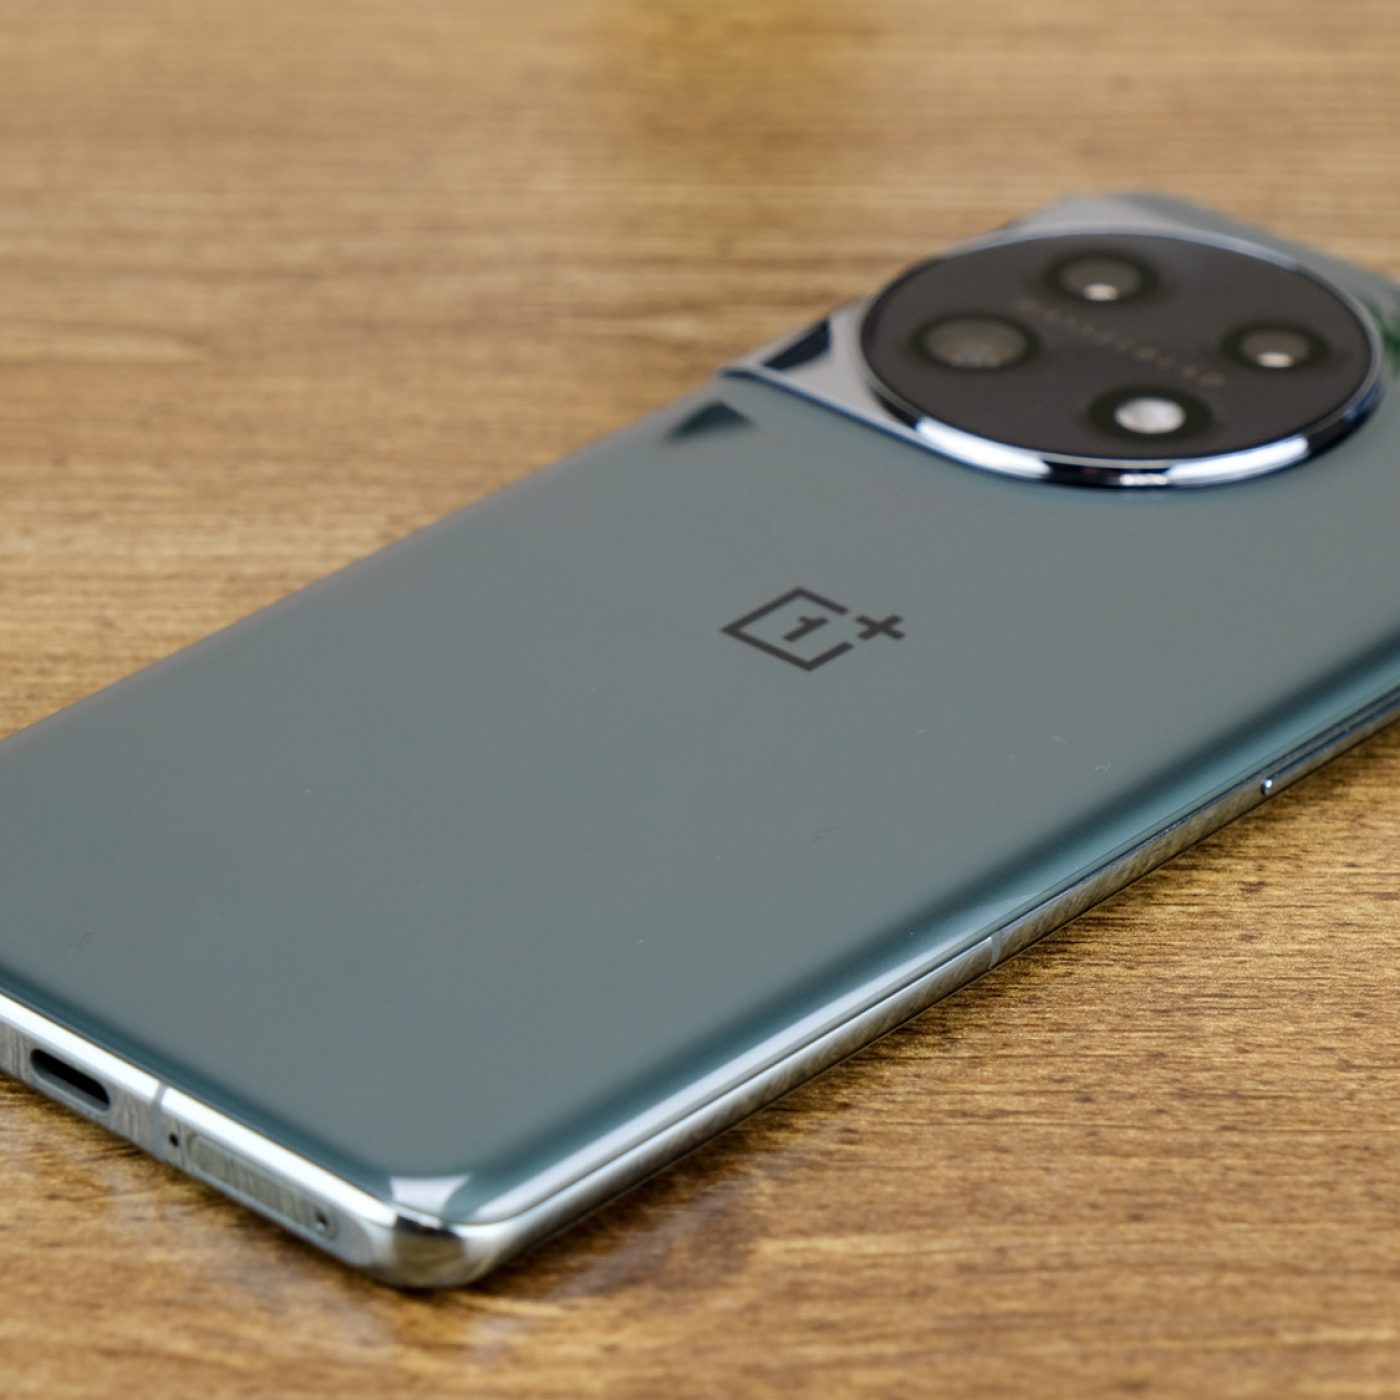 OnePlus 11 camera: here's everything you need to know - PhoneArena